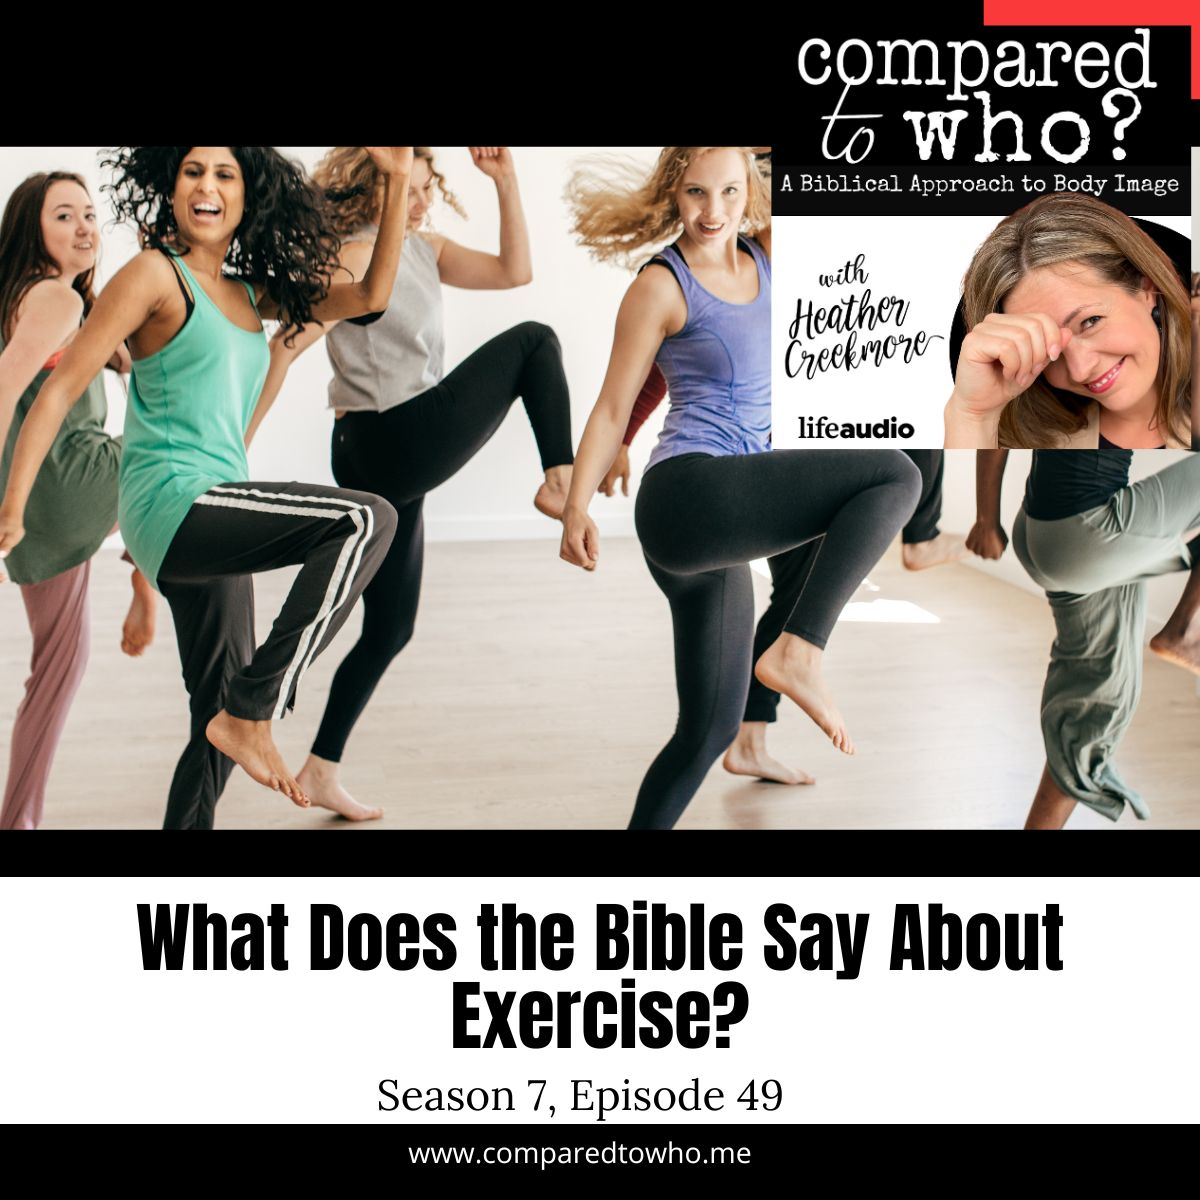 Should I Exercise? Exercise, the Bible, and Body Image Issues